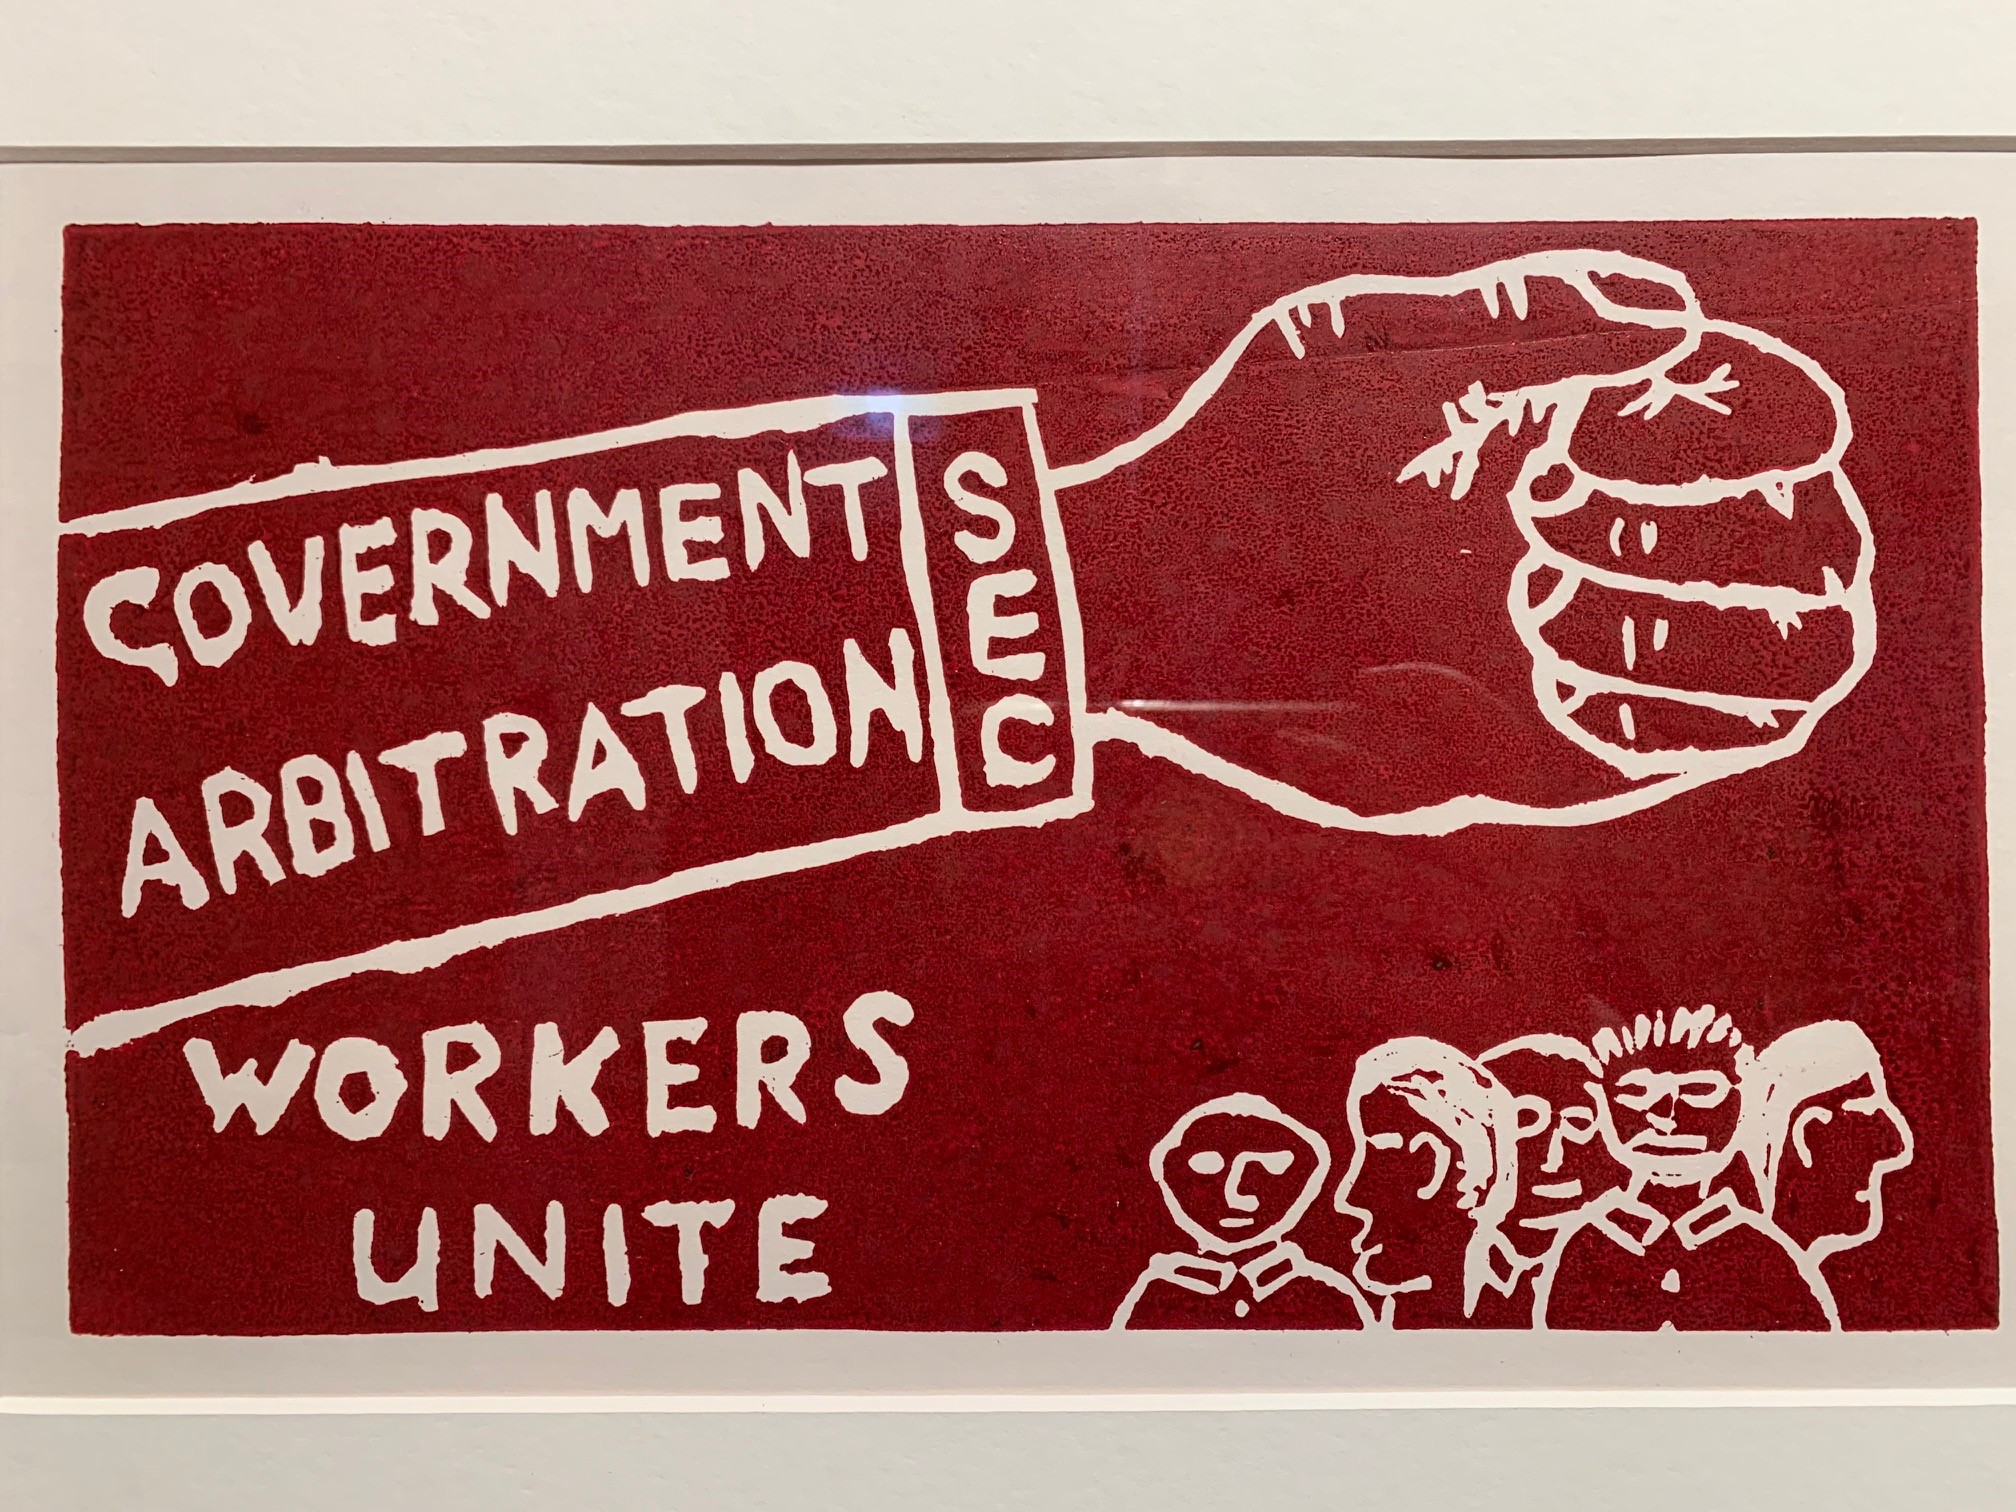 A red poster with white writing that says government arbitration, workers unite.